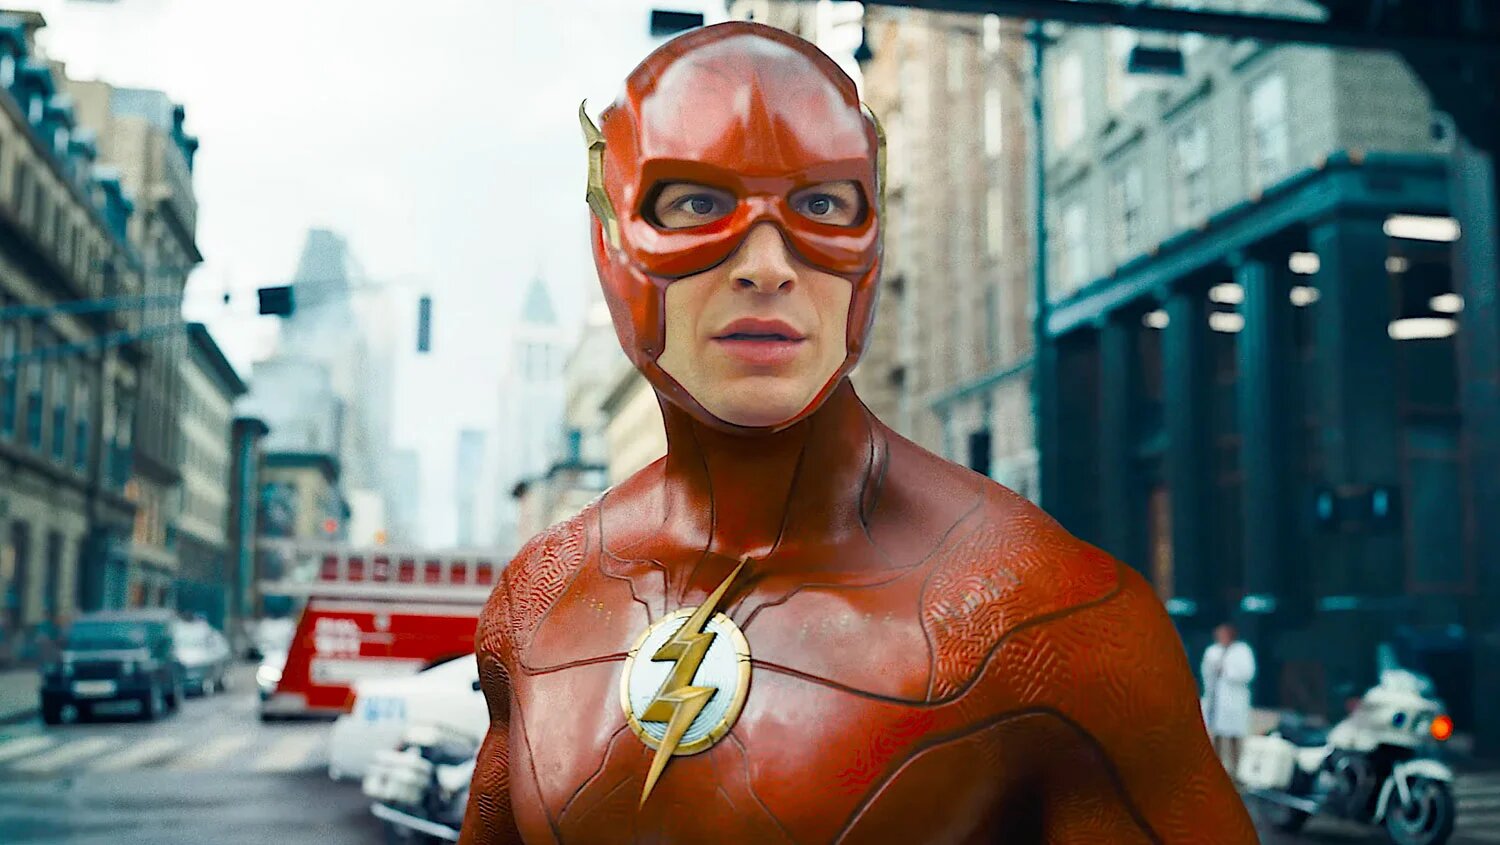 Flash has multiple alternate dark endings that you never knew about - shocking twist inside! 10